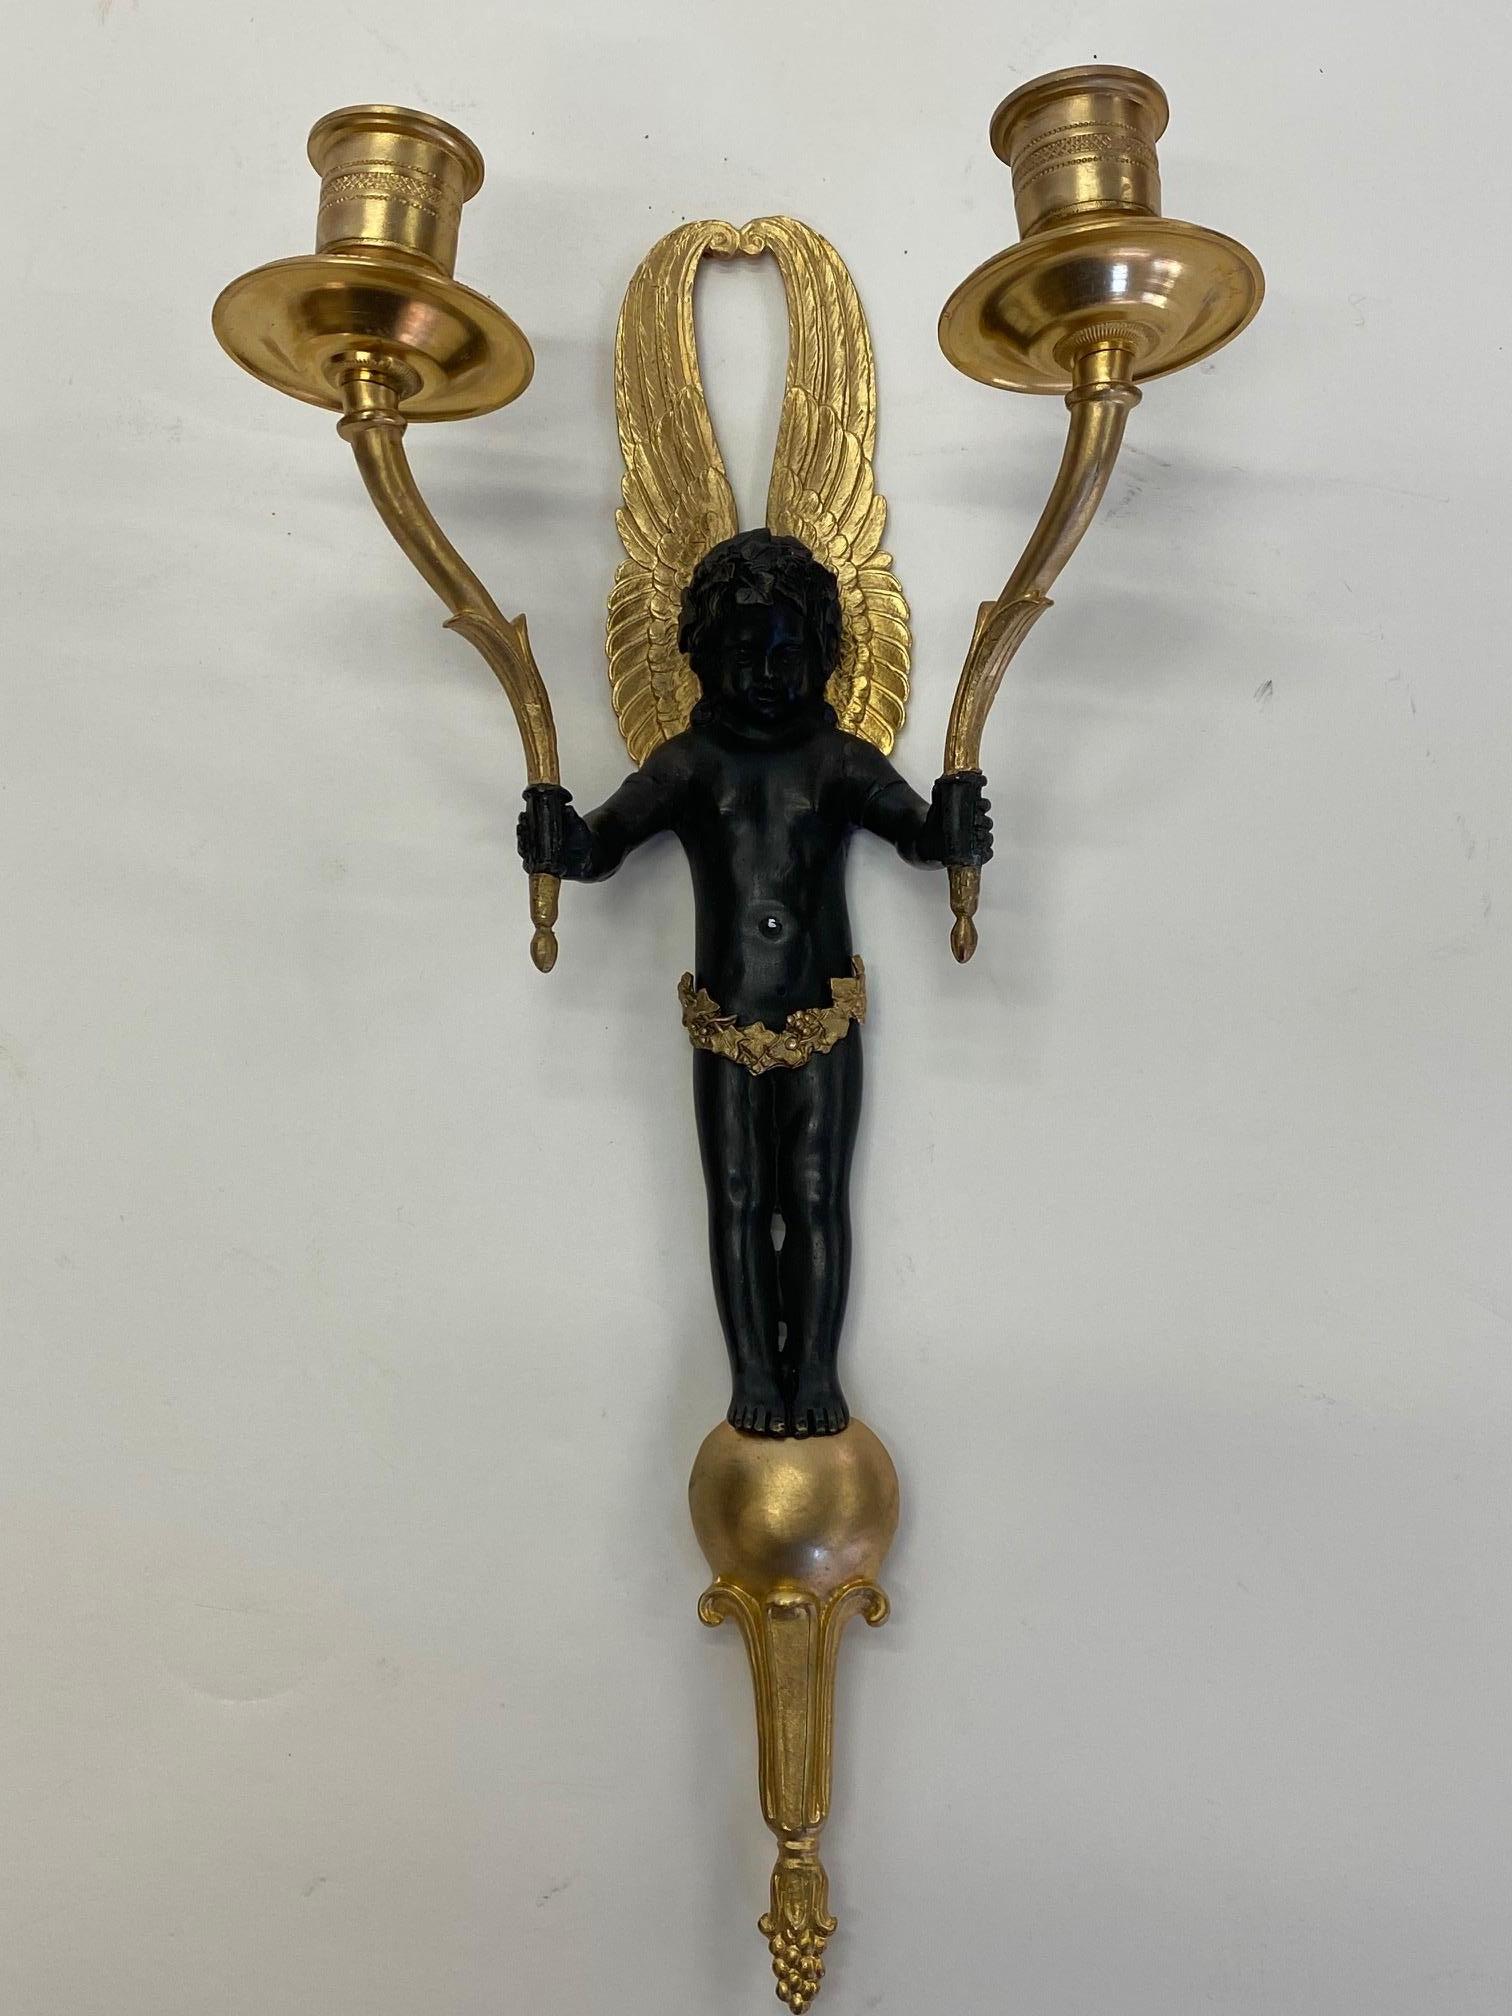 Ornate early 20th century pair of candle wall sconces having gold on bronze and patinated bronze finish to the putti figures with gold wings and dramatic poses.